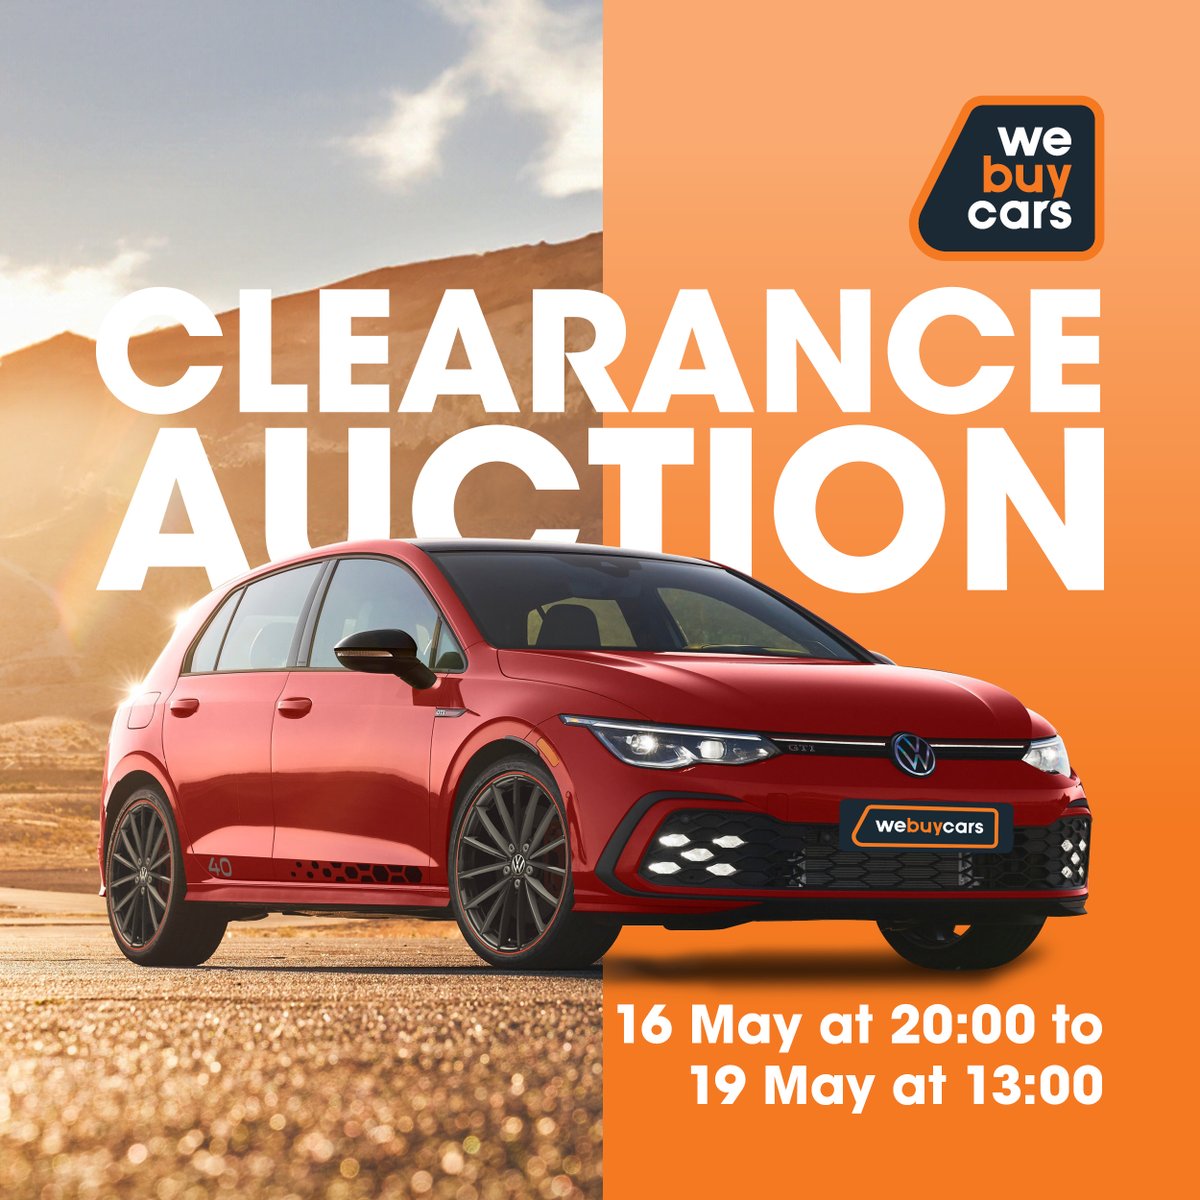 Are you ready for another Clearance Auction? Set your alarms to start bidding on the 16th of May ⏱🚗 #carsforsale #preownedcars #usedcars #usedcarsforsale #carshopping #carfinance #autosales #carsales #carlifestyle #volkswagenlove